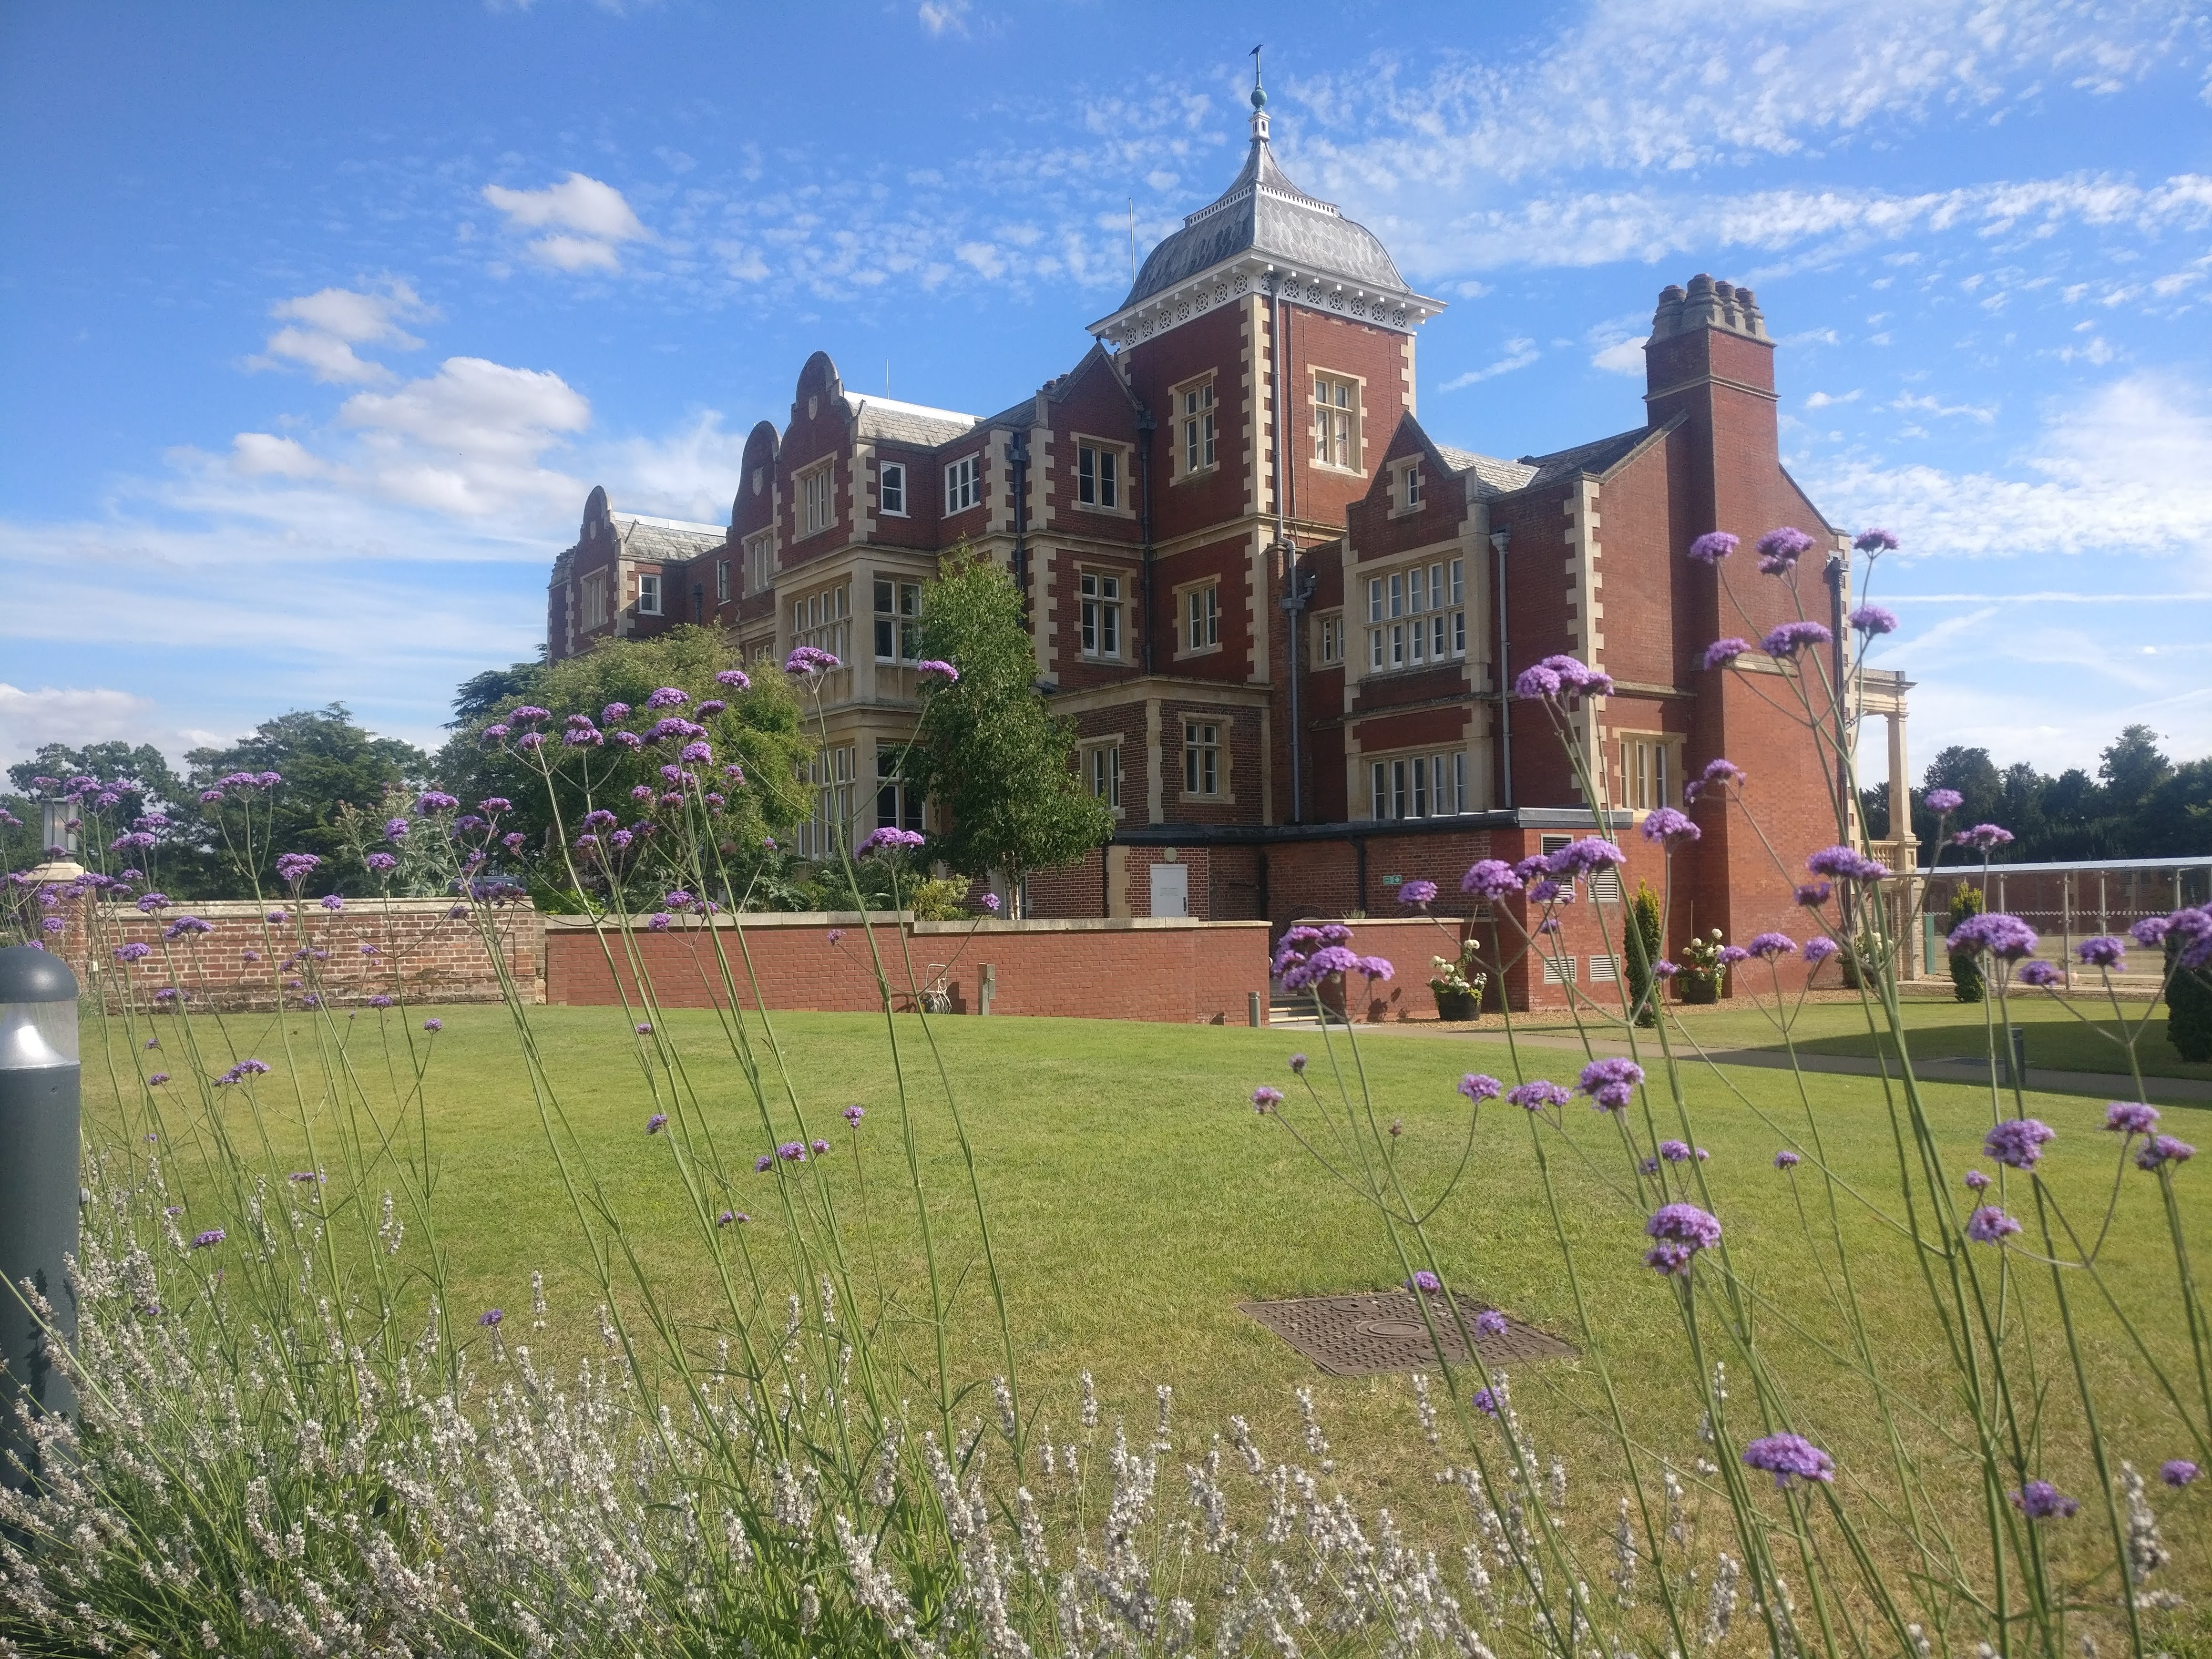 A grand redbrick building with purple flowers in the foreground and a well kept lawn